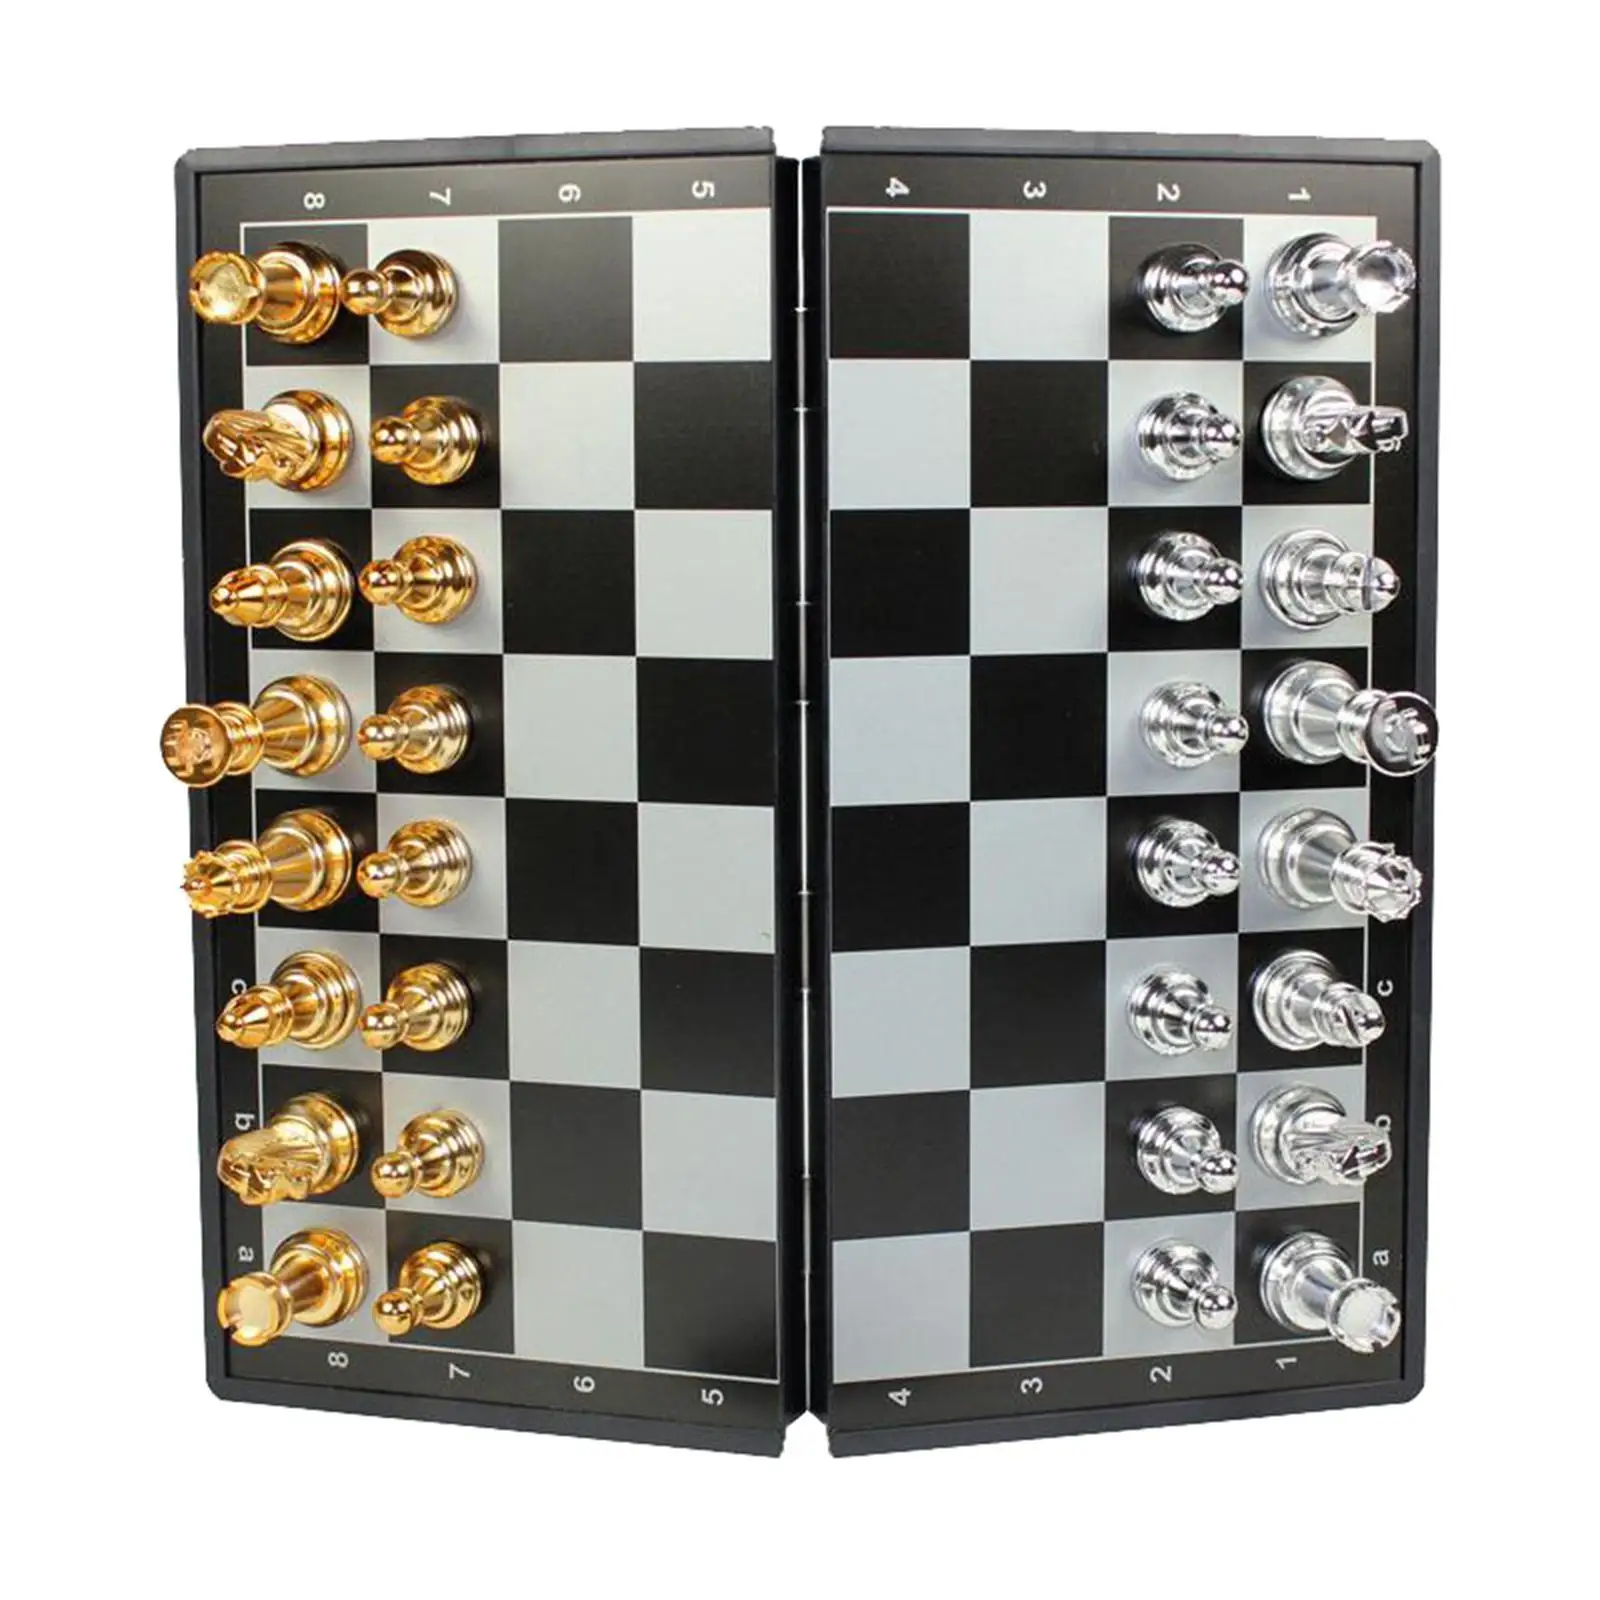 Chess Set Board Game Toy with Plastic Chess Board Inside for